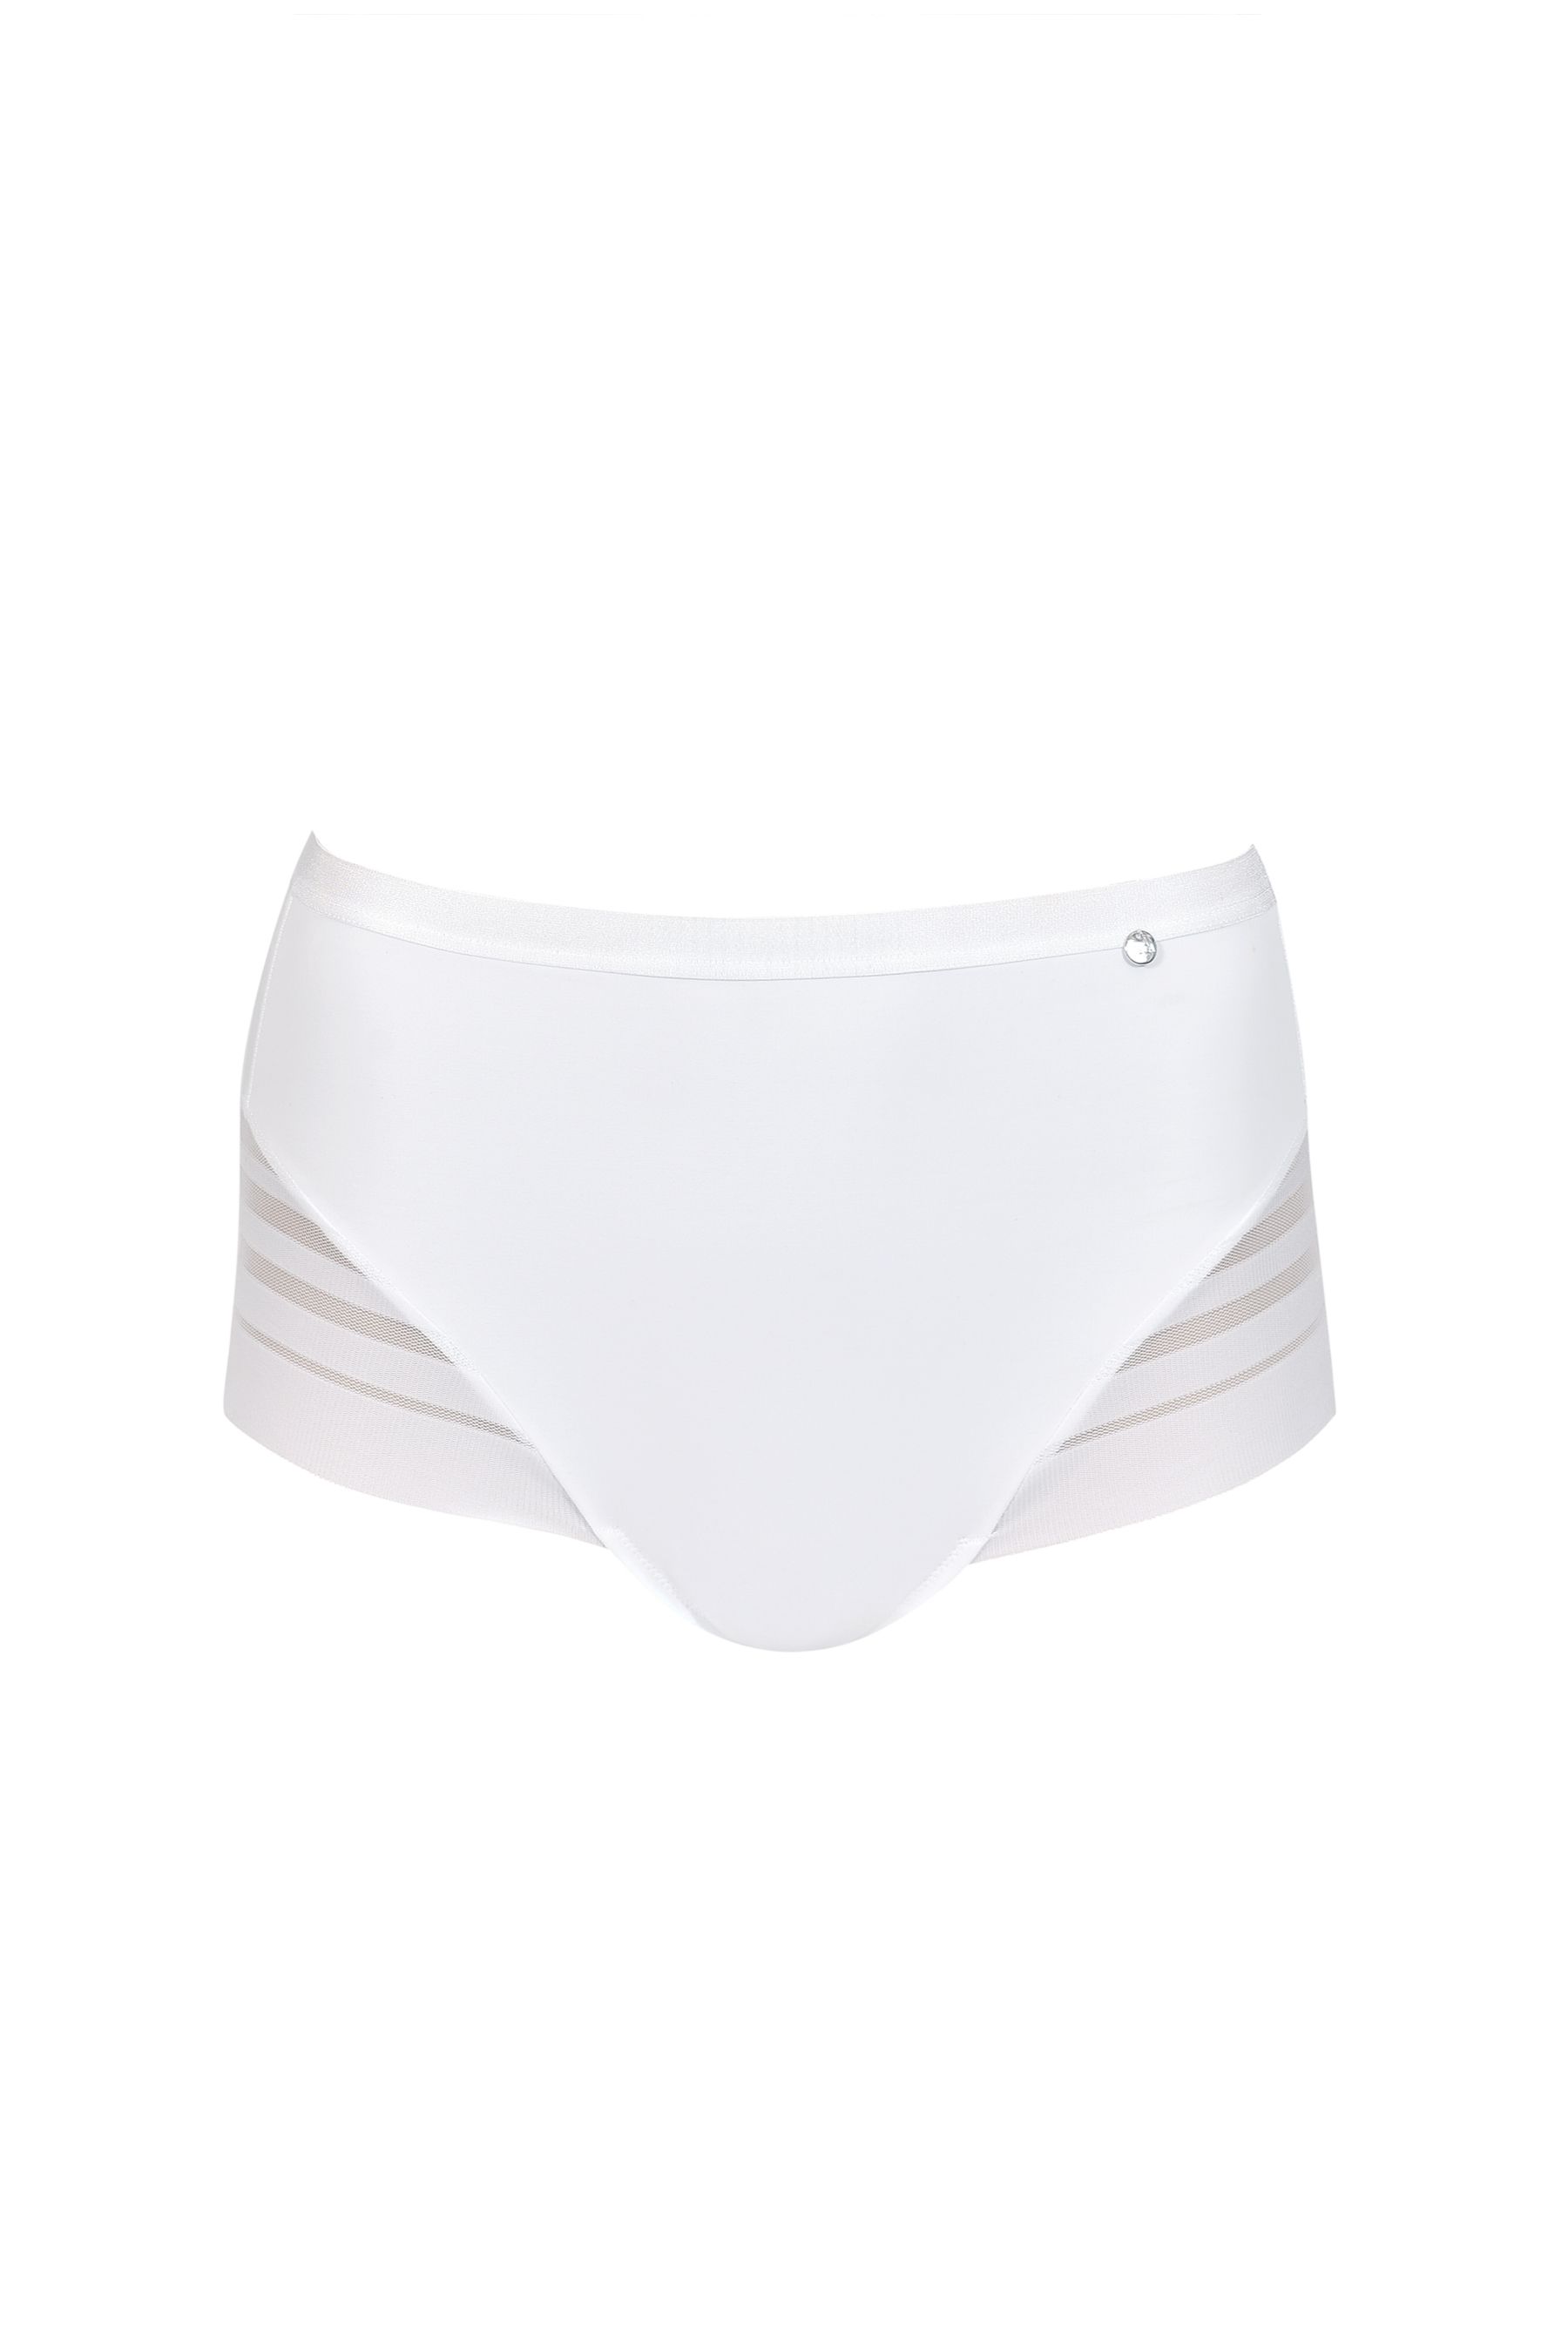 These fashionable 'Alegra' high waisted briefs from Lisca have seamless edges for a smooth look under tight clothes, and feature seductive transparent details. The front is lined with functional tulle to shape your figure. The briefs are soft and comfortable, thanks to the wide elastic piping in the waist, which prevents unnecessary cutting into skin.